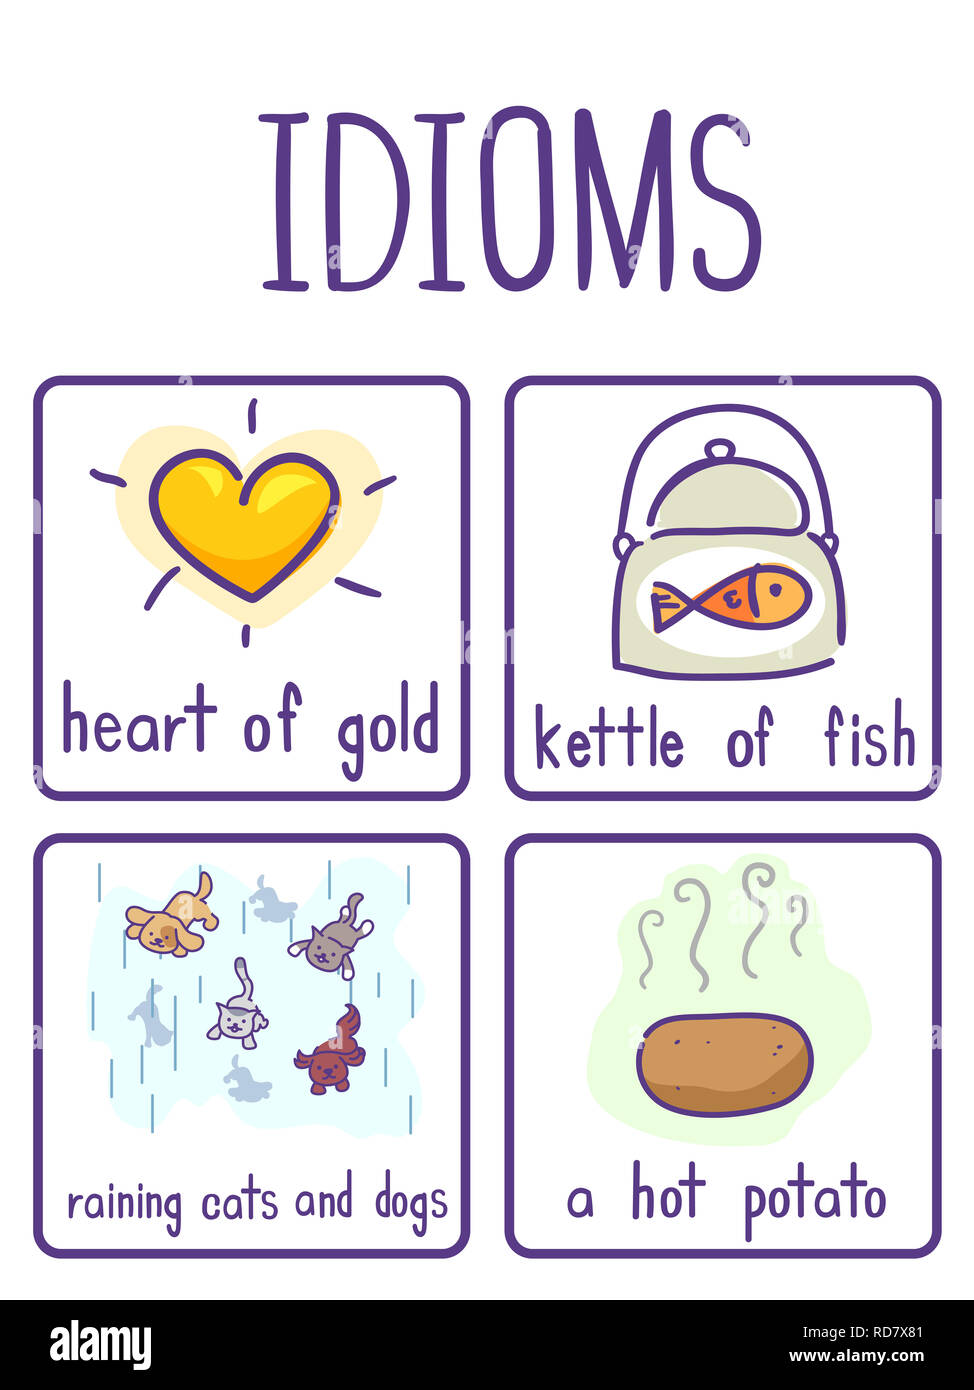 Illustration of Examples of Idioms like Heart of Gold, Kettle of Fish,  Raining Cats and Dogs and a Hot Potato for an English Class Stock Photo -  Alamy